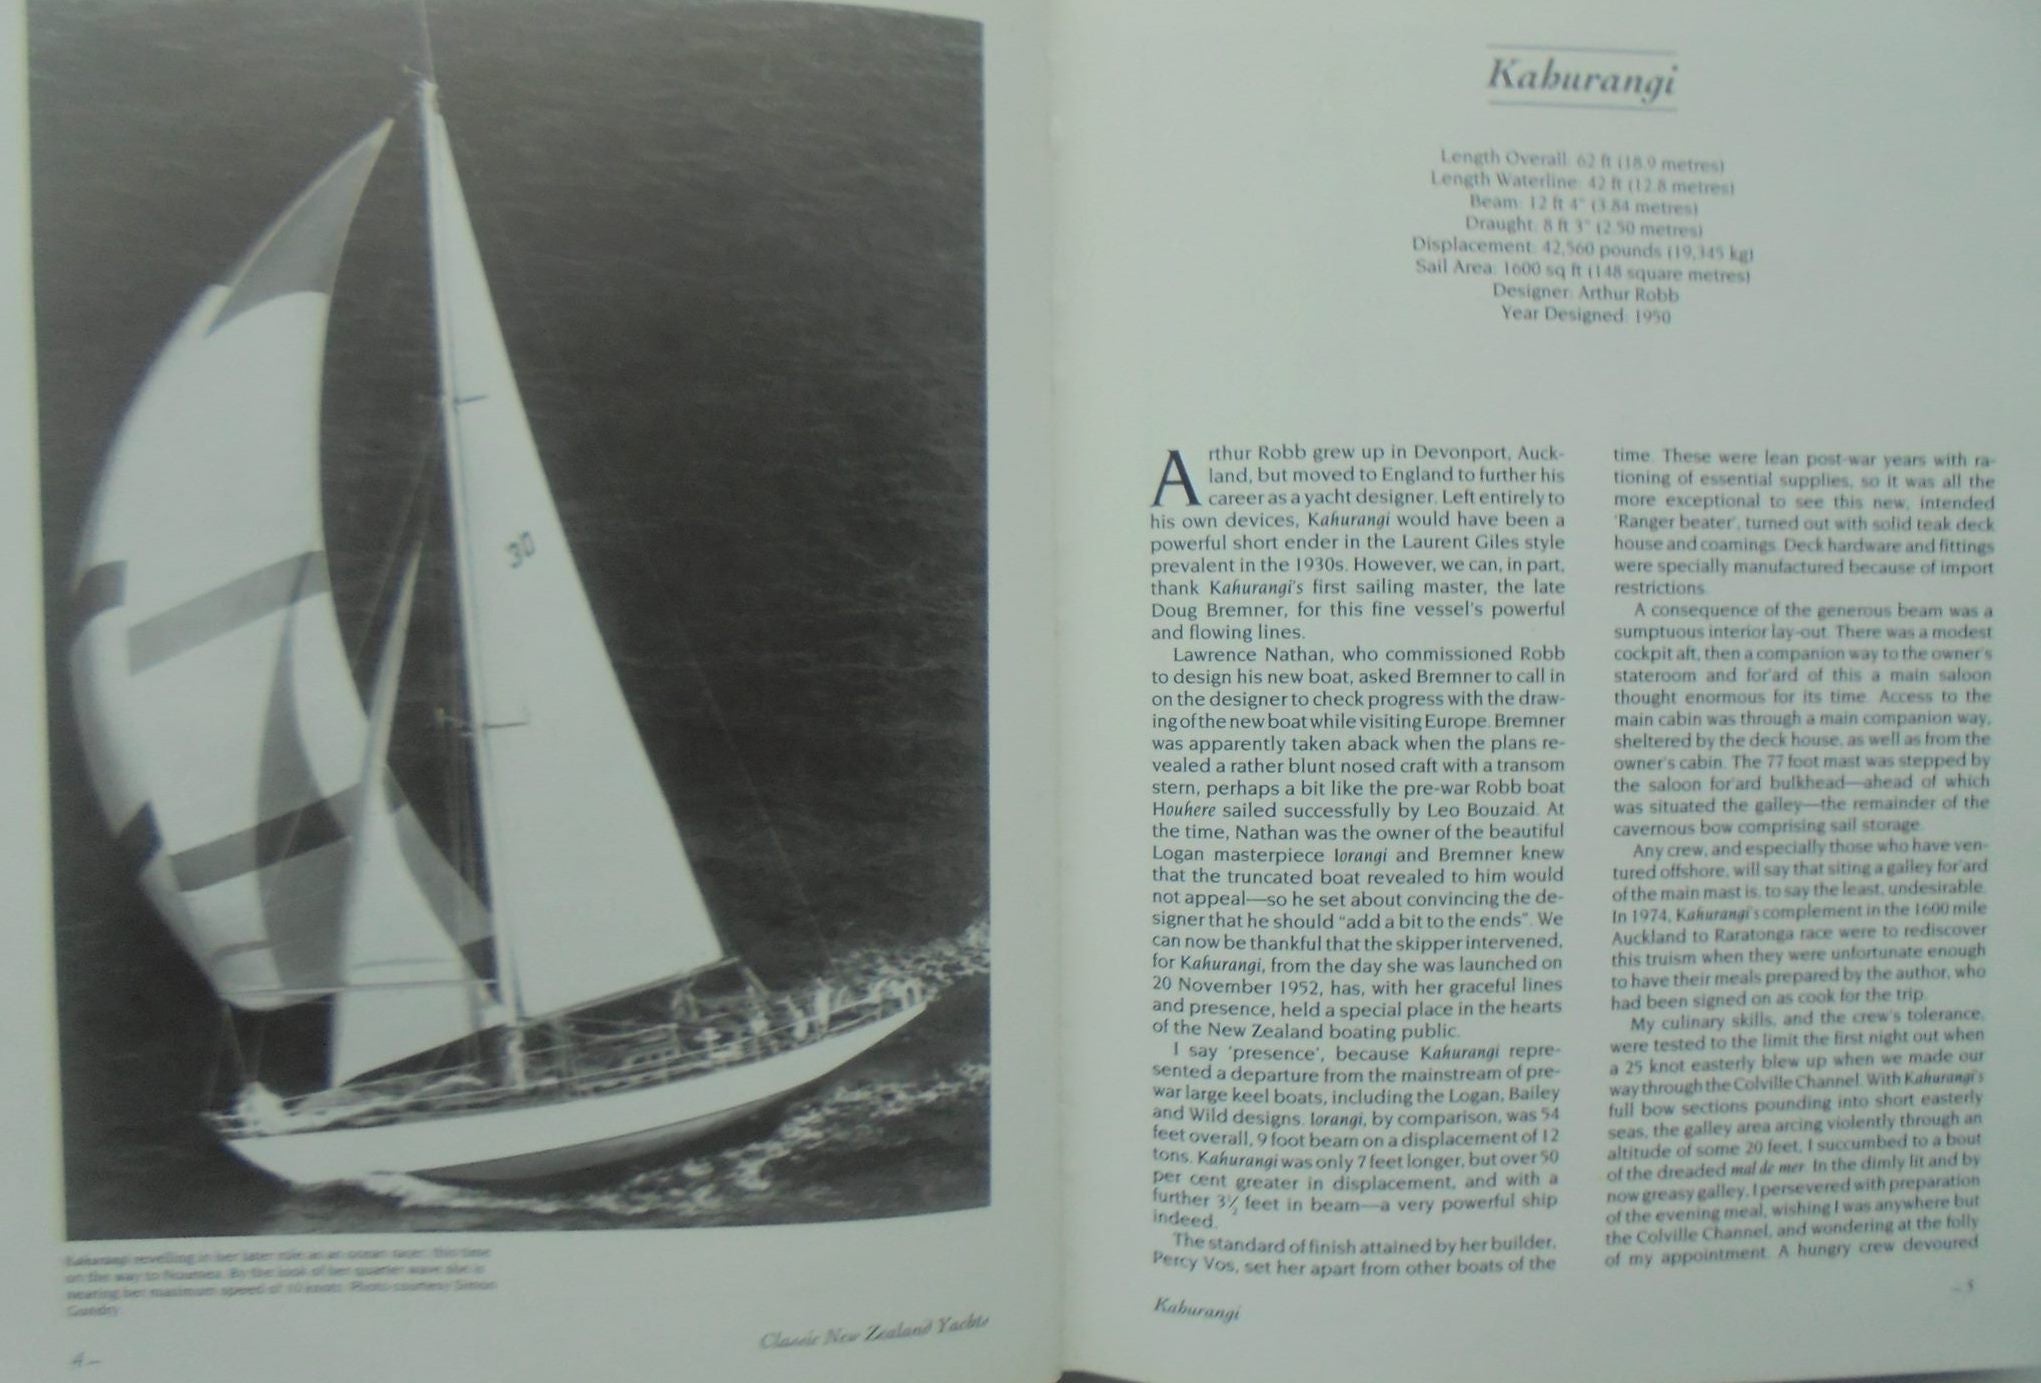 Classic New Zealand Yachts: Four Decades of Successful Yacht Design - 1950-90 By Bill Endean.